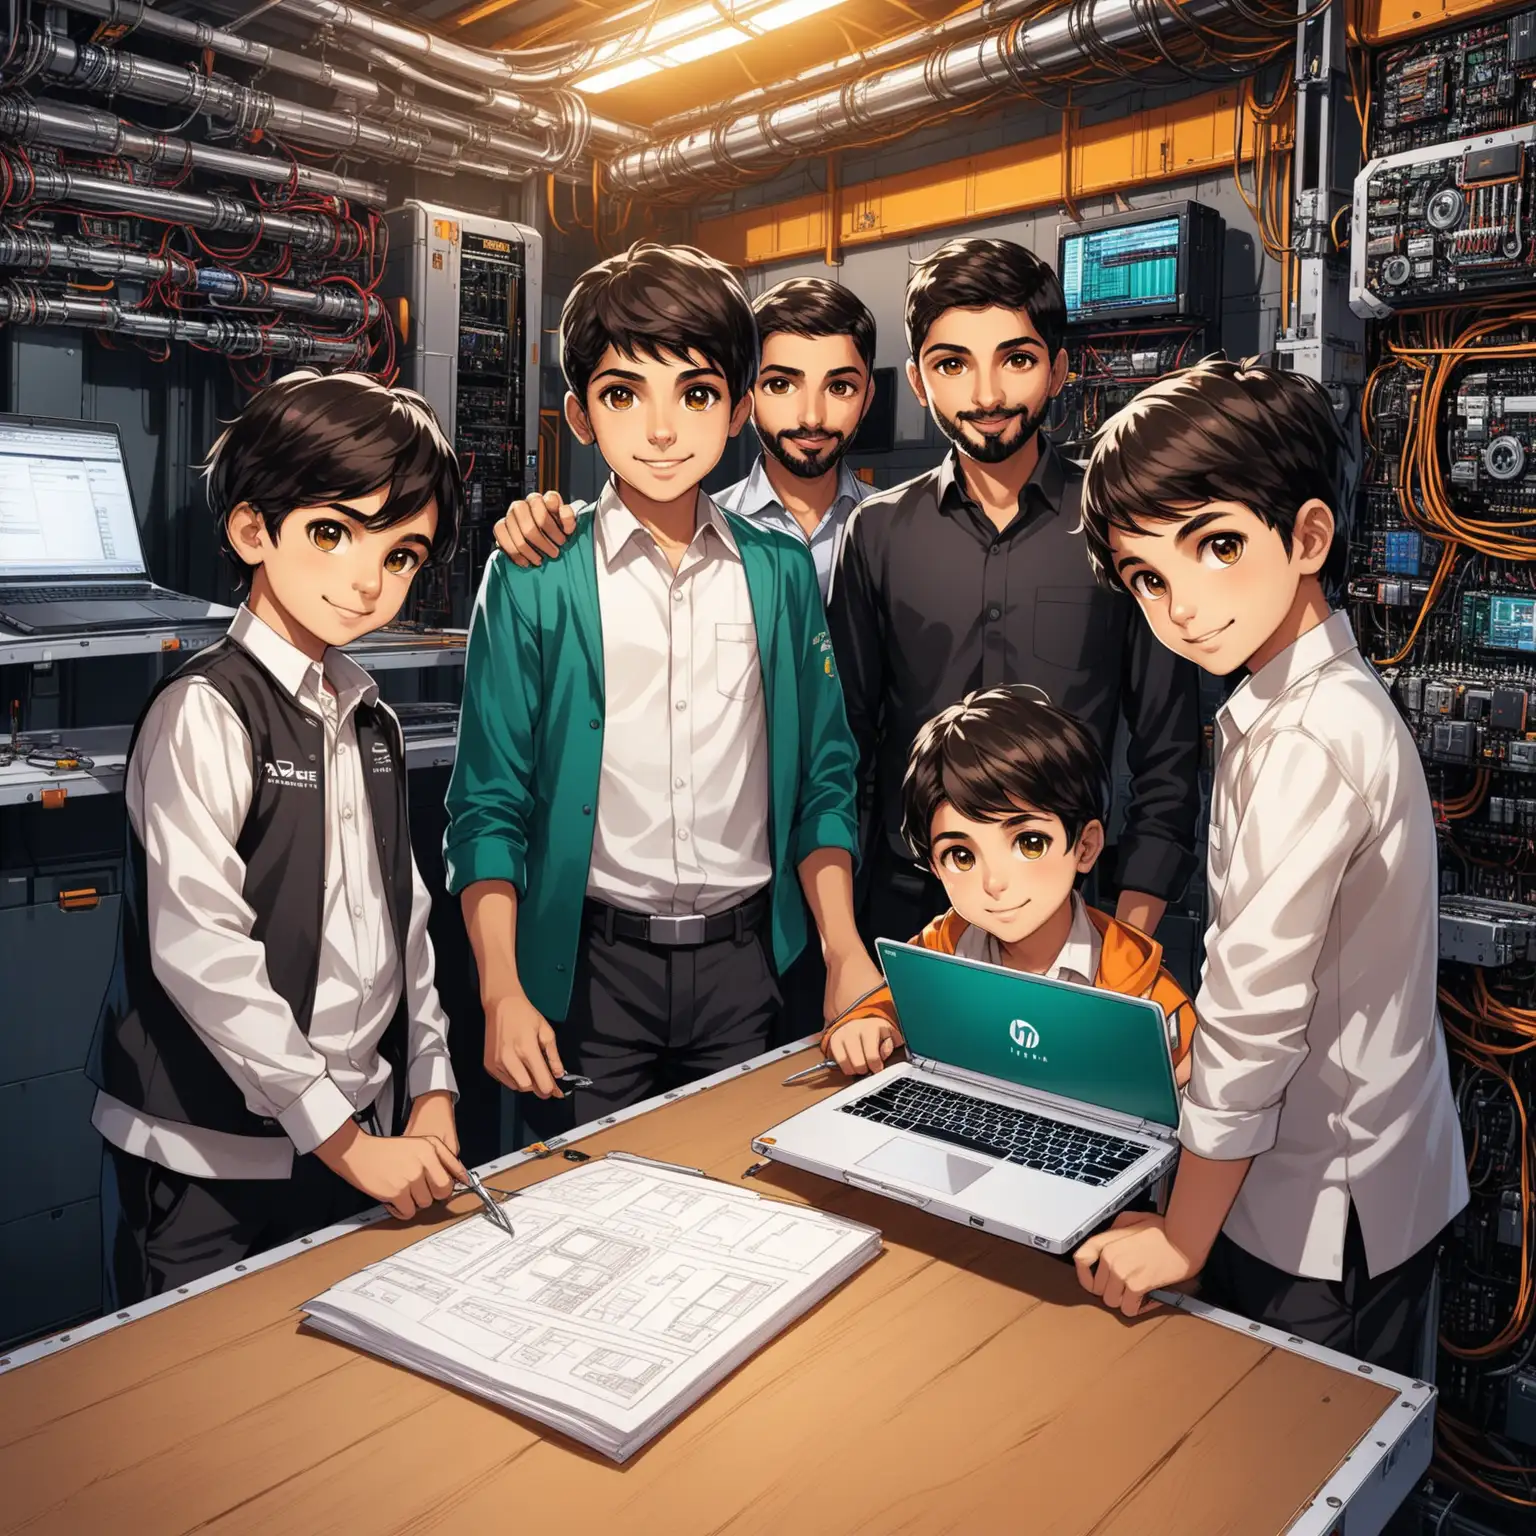 Persian Boys Designing Super Modern Engines with High Technology Tools